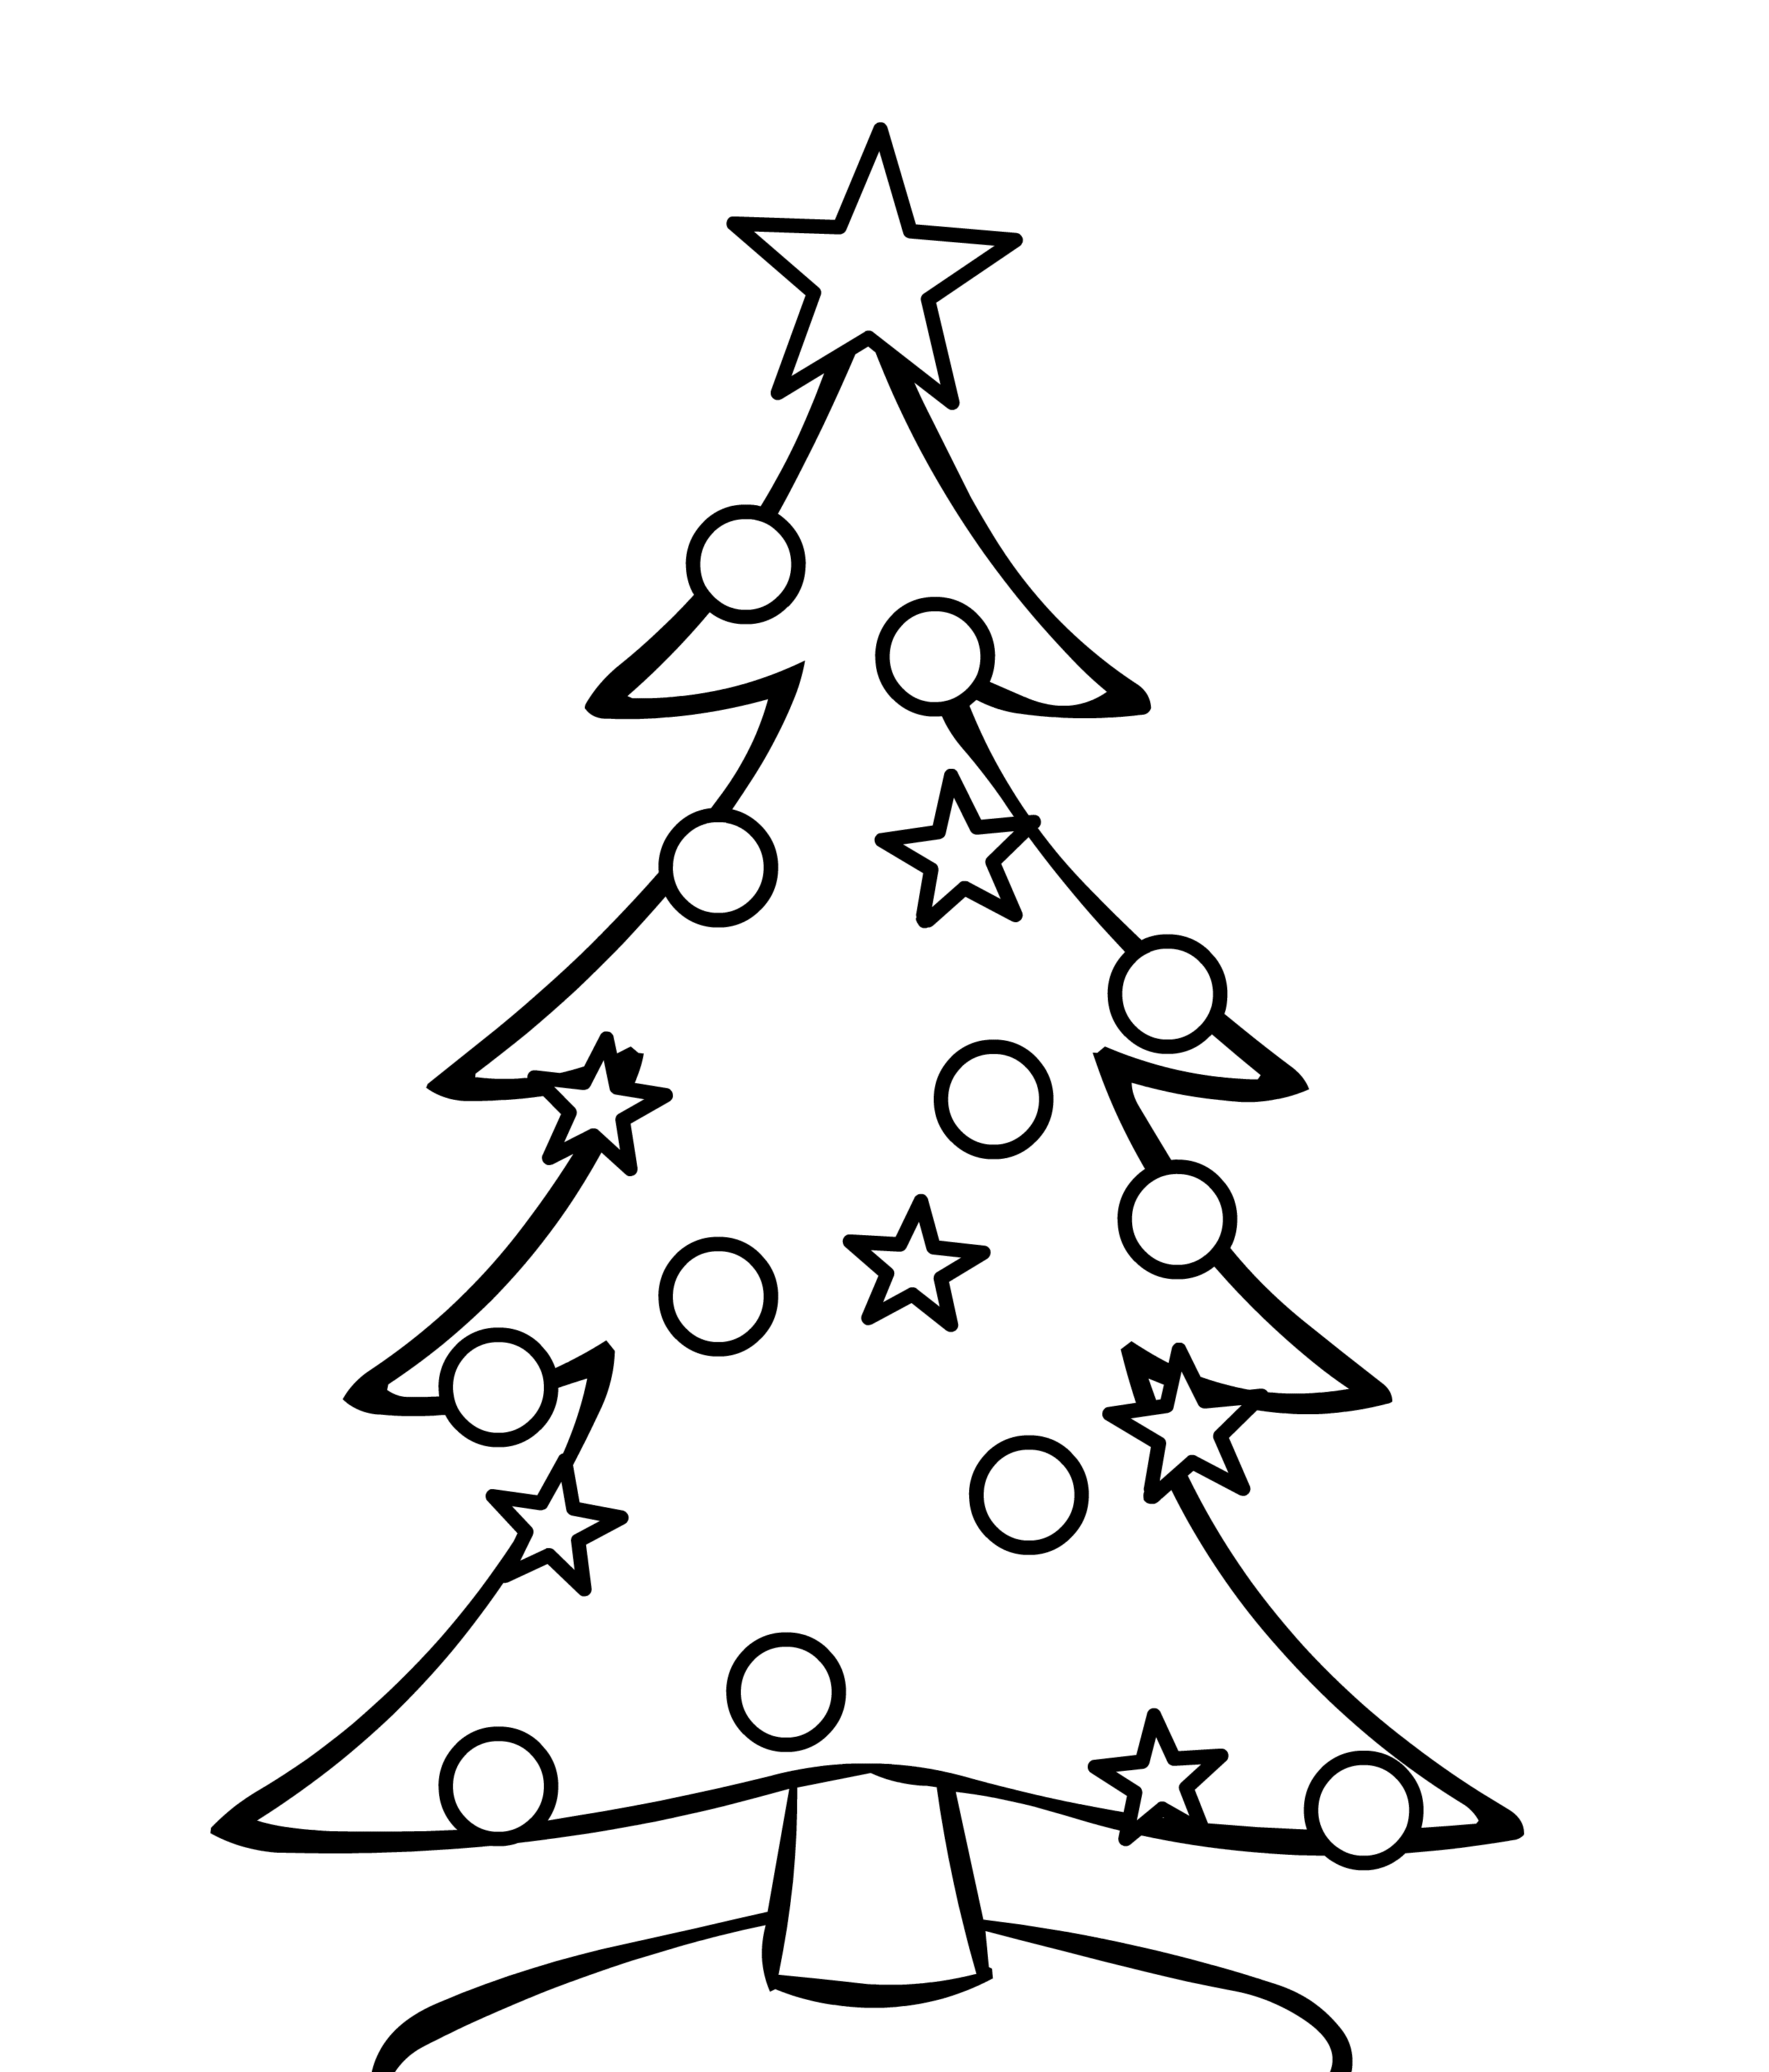 Christmas Tree Coloring Pages For Children   Christmas Coloring ...